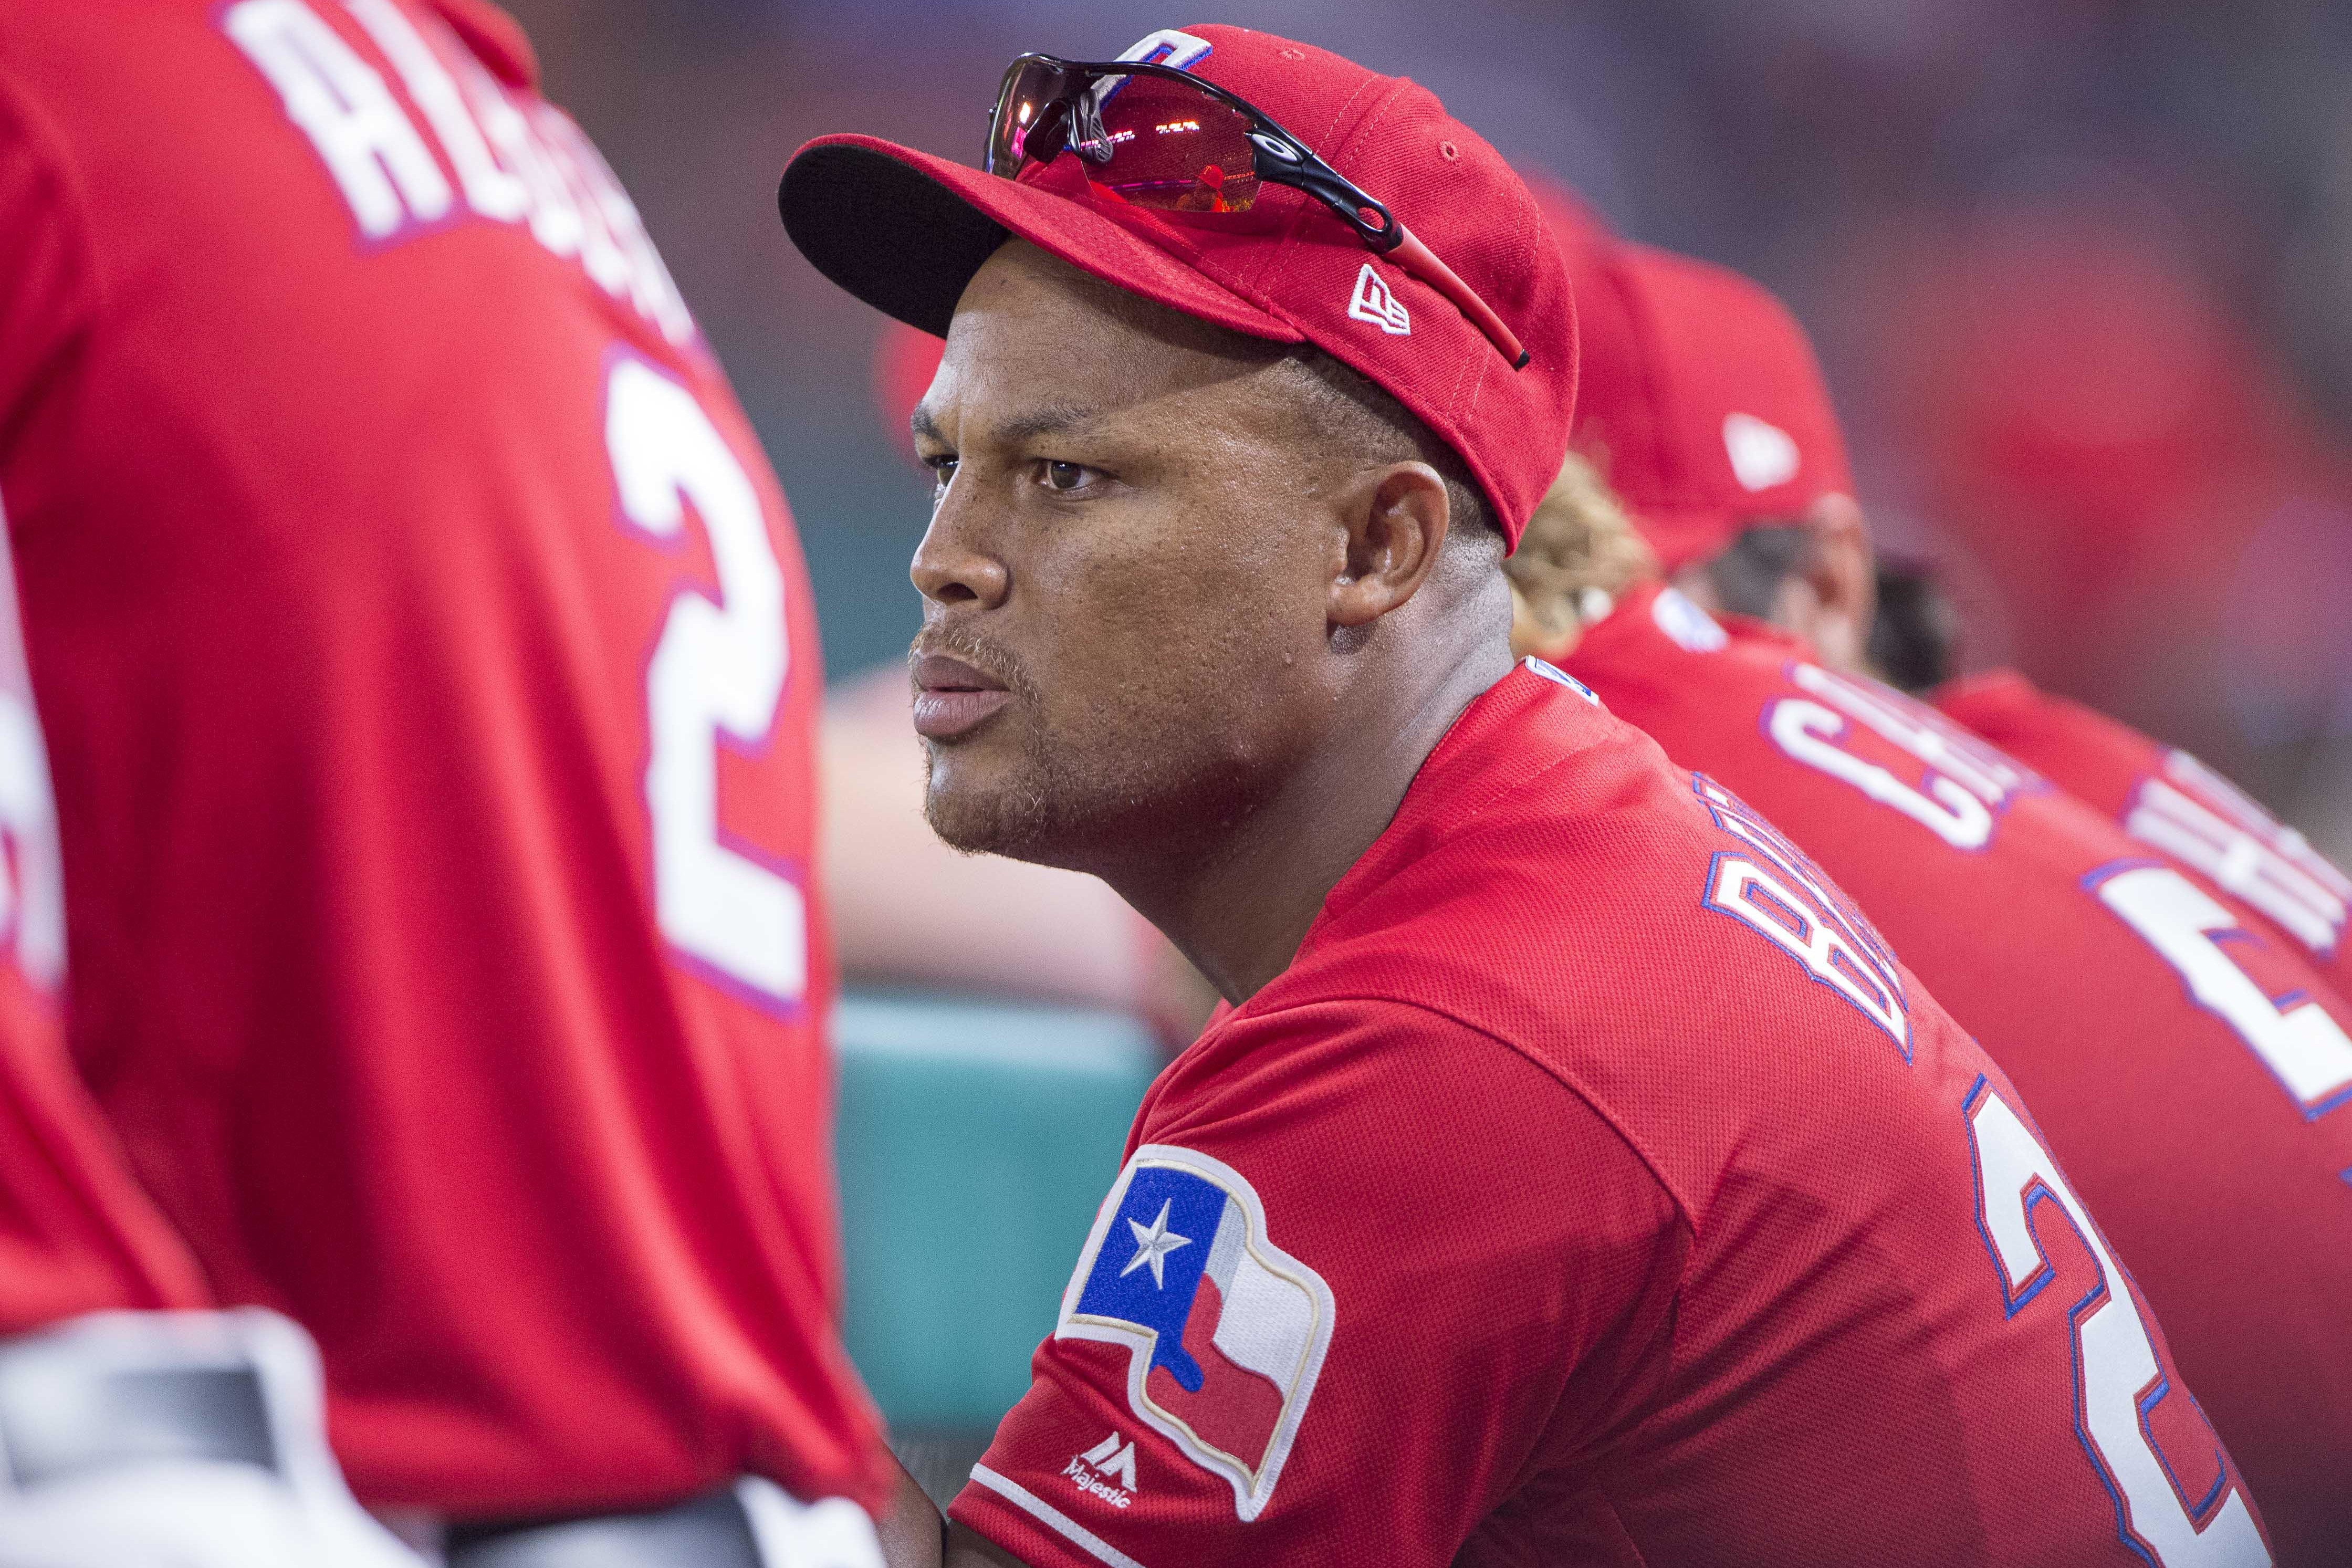 Report: Adrian Beltre signs 2-year extension